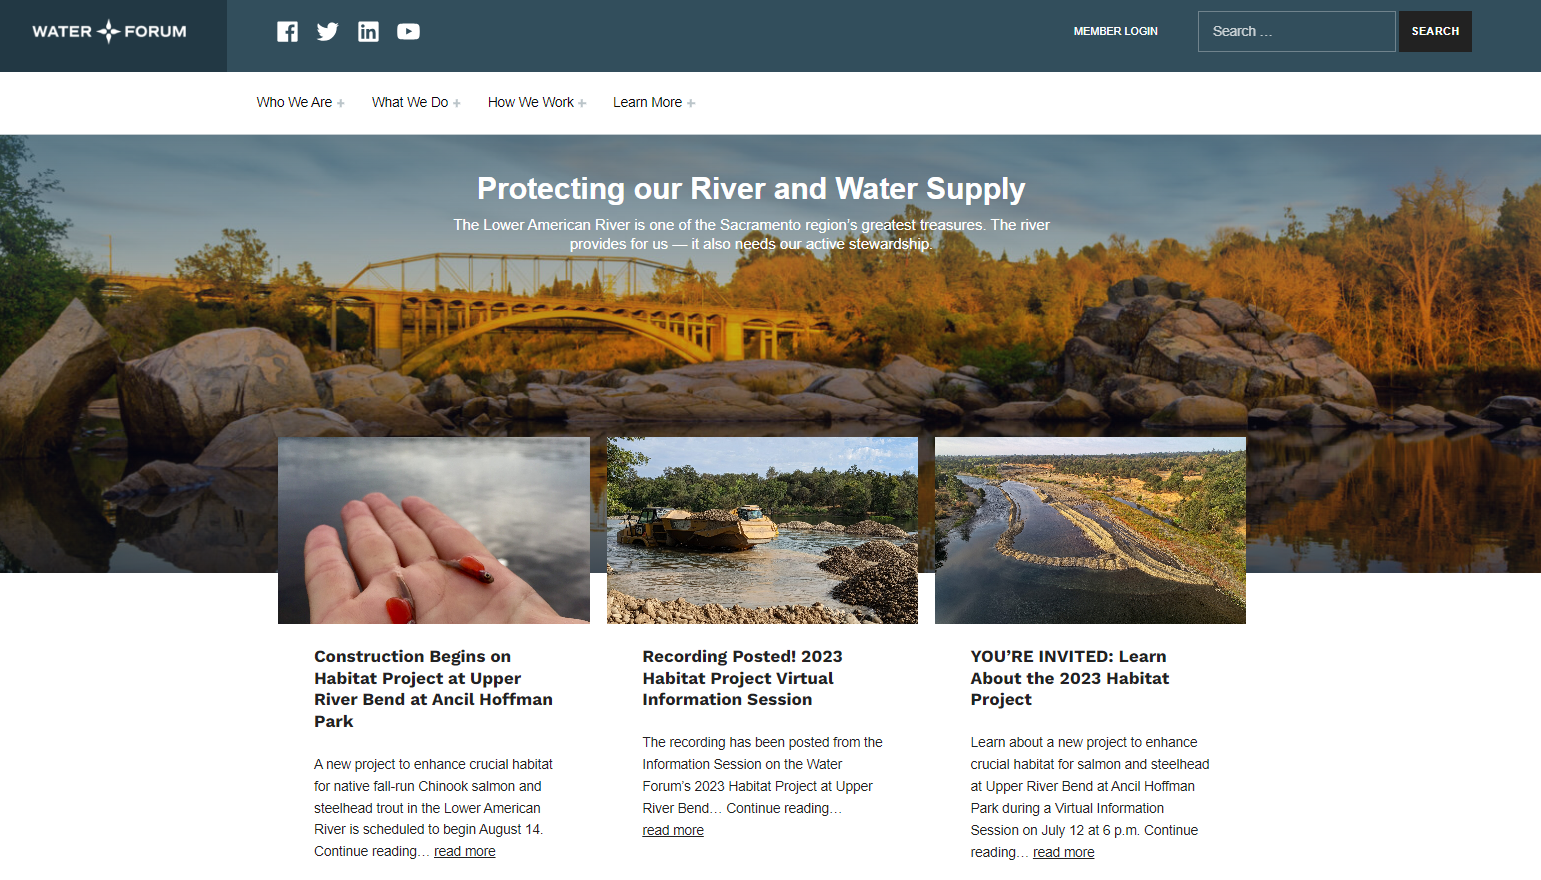 Introducing the Water Forum’s Newly Redesigned Website!